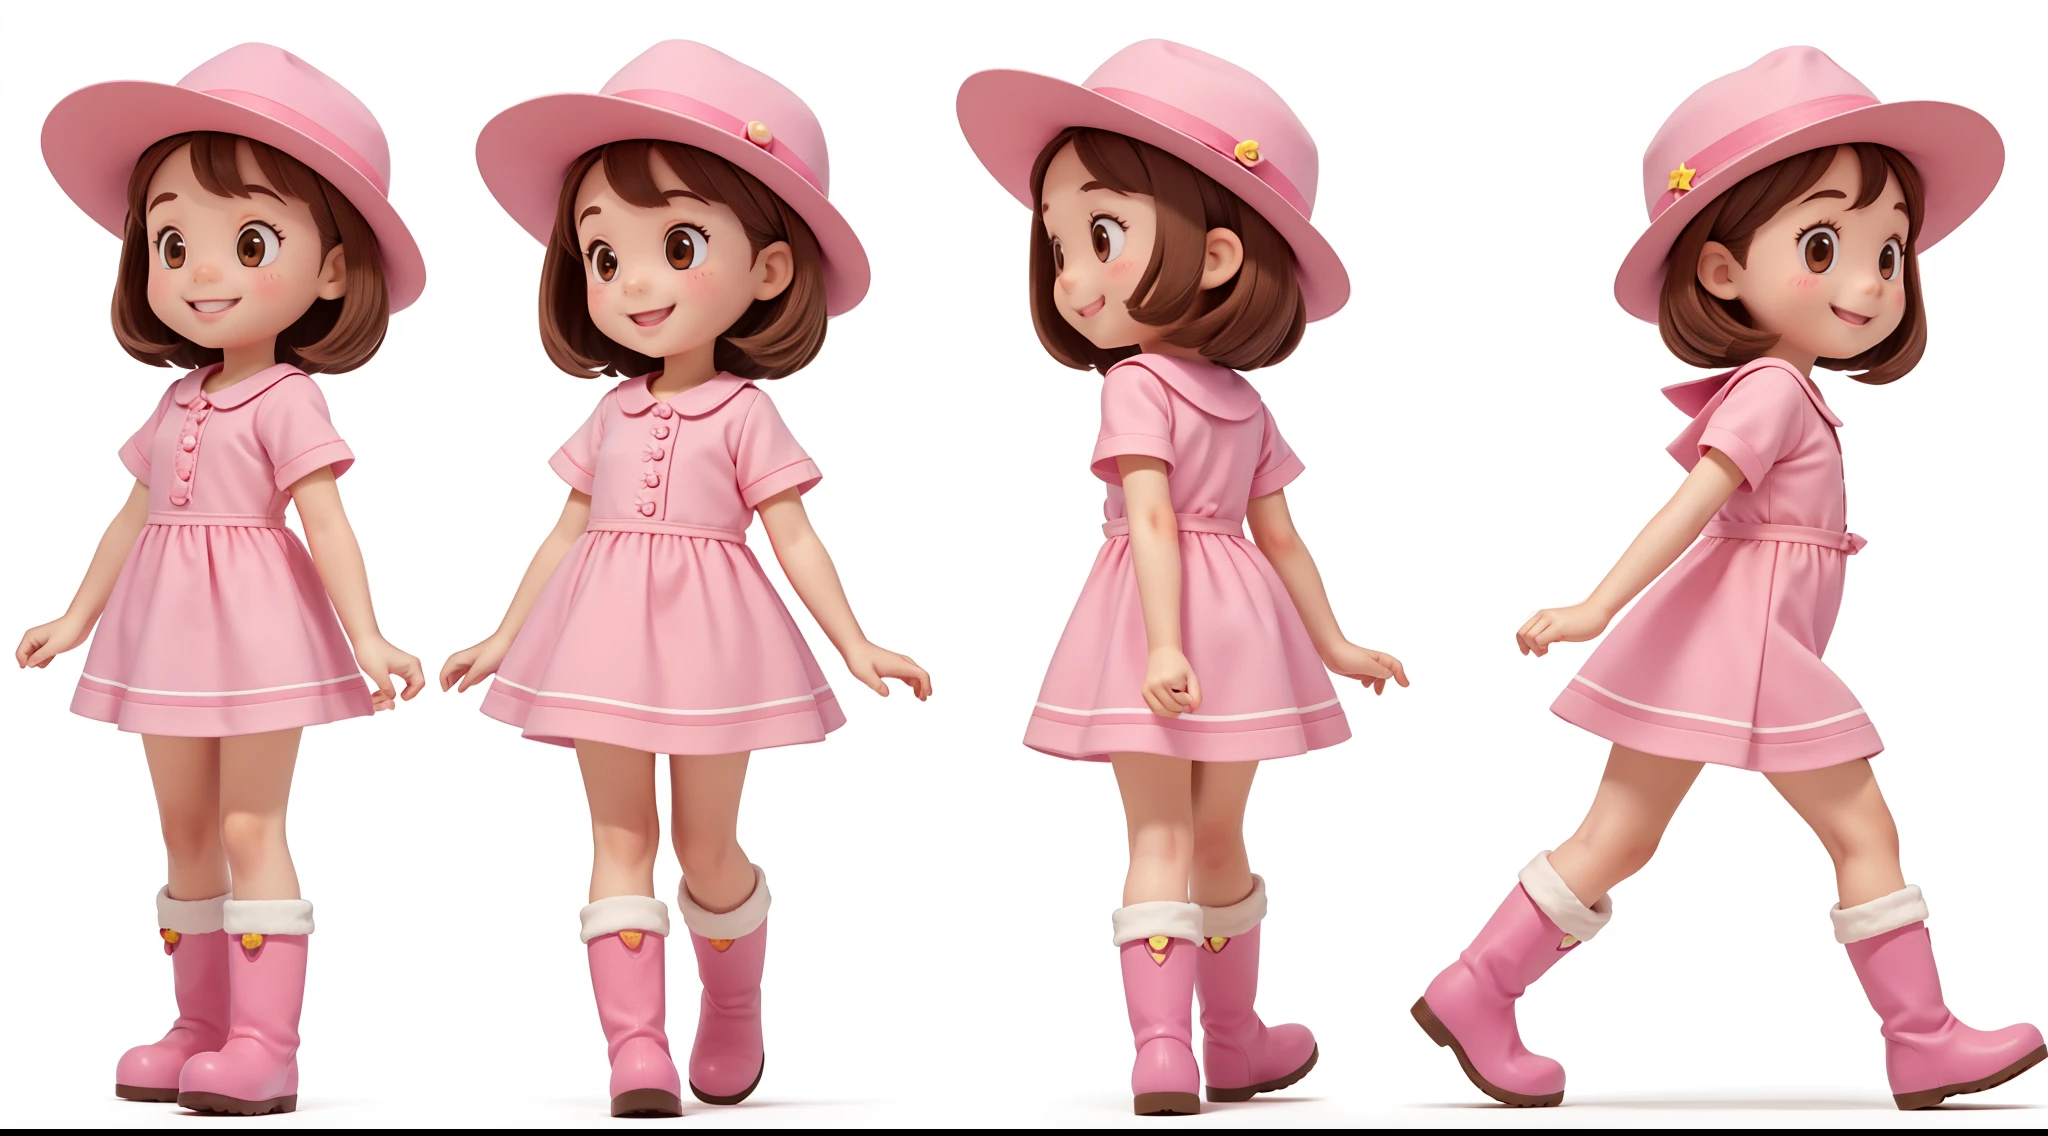 a little girl walking, character animation frames, with an identical design of the character in each frame. The  is alone, happy, with brown hair, brown eyes, rosy cheeks, wearing a pink farm outfit, a pink hat, pink boots, and a white background.